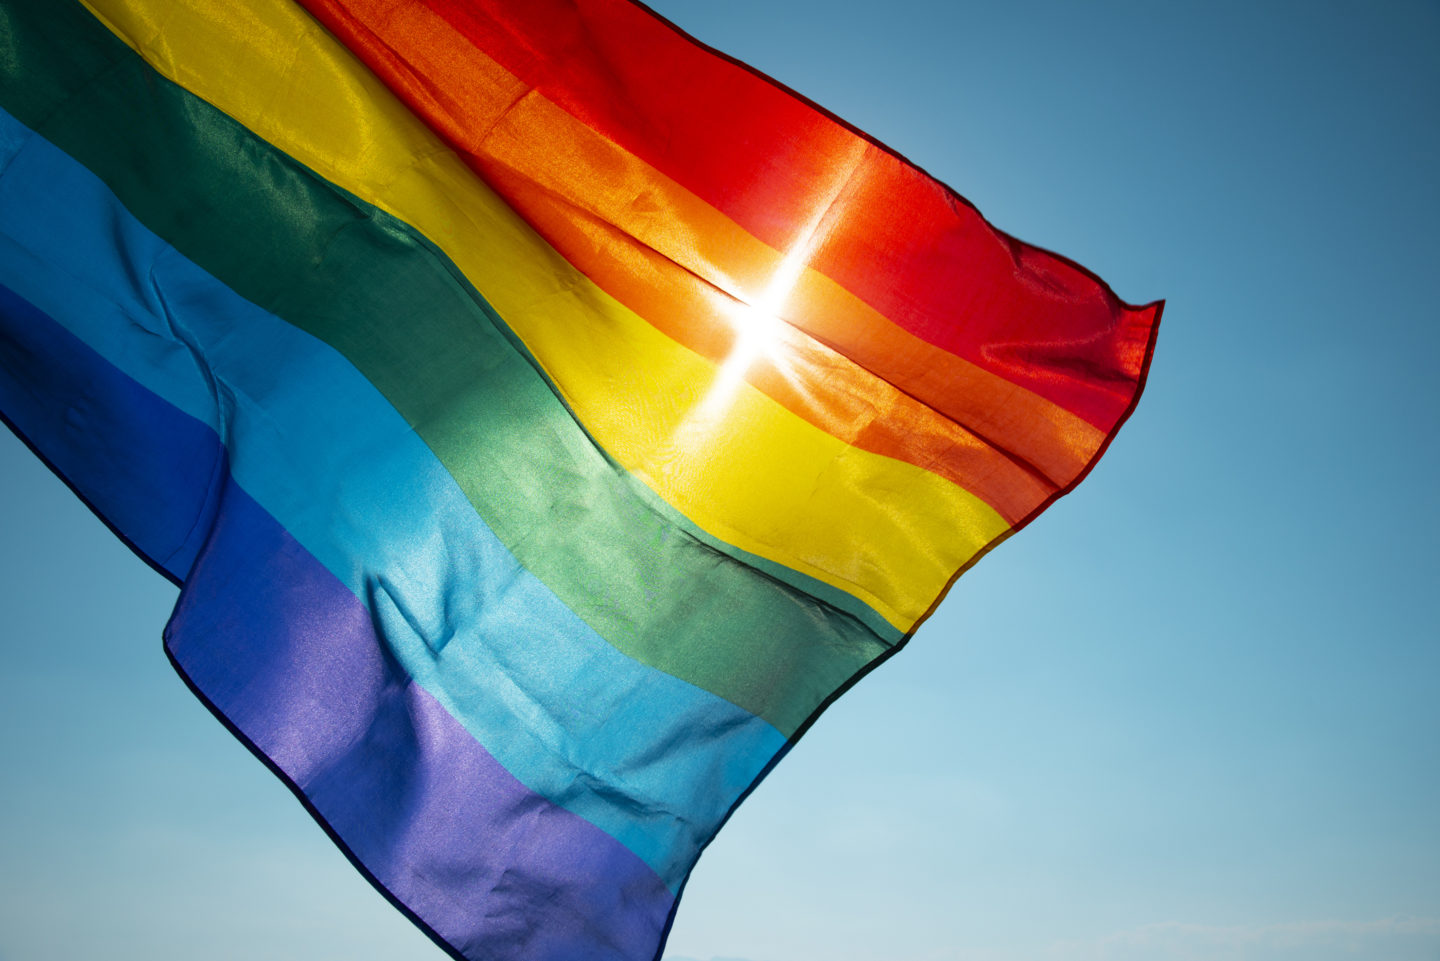 Catholic church told to shut down gay conversion therapy groups 7